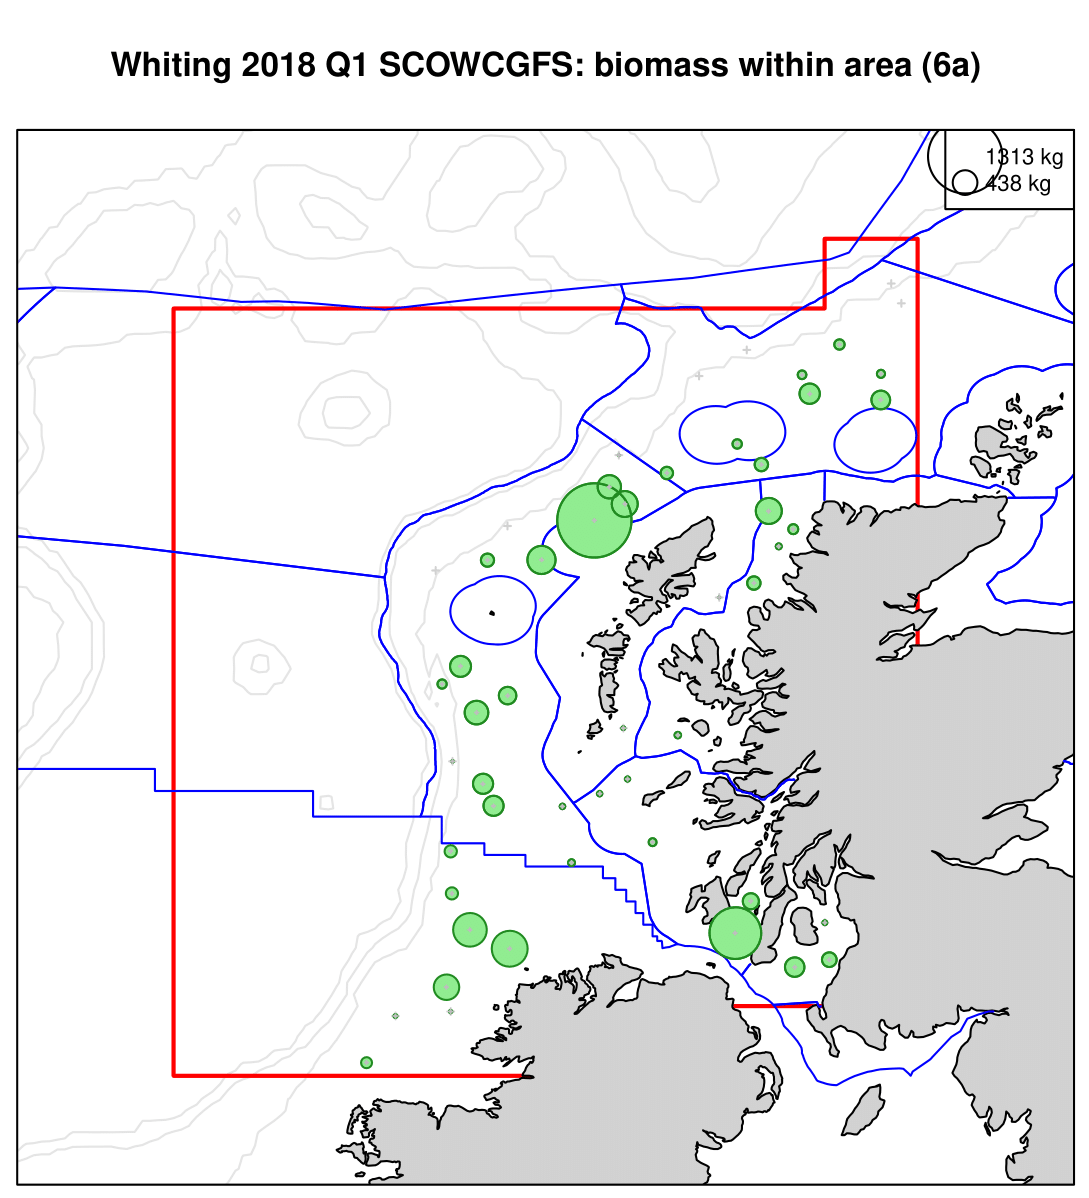 Whiting 2018 Q1 SCOWCGFS: biomass within area (6a)